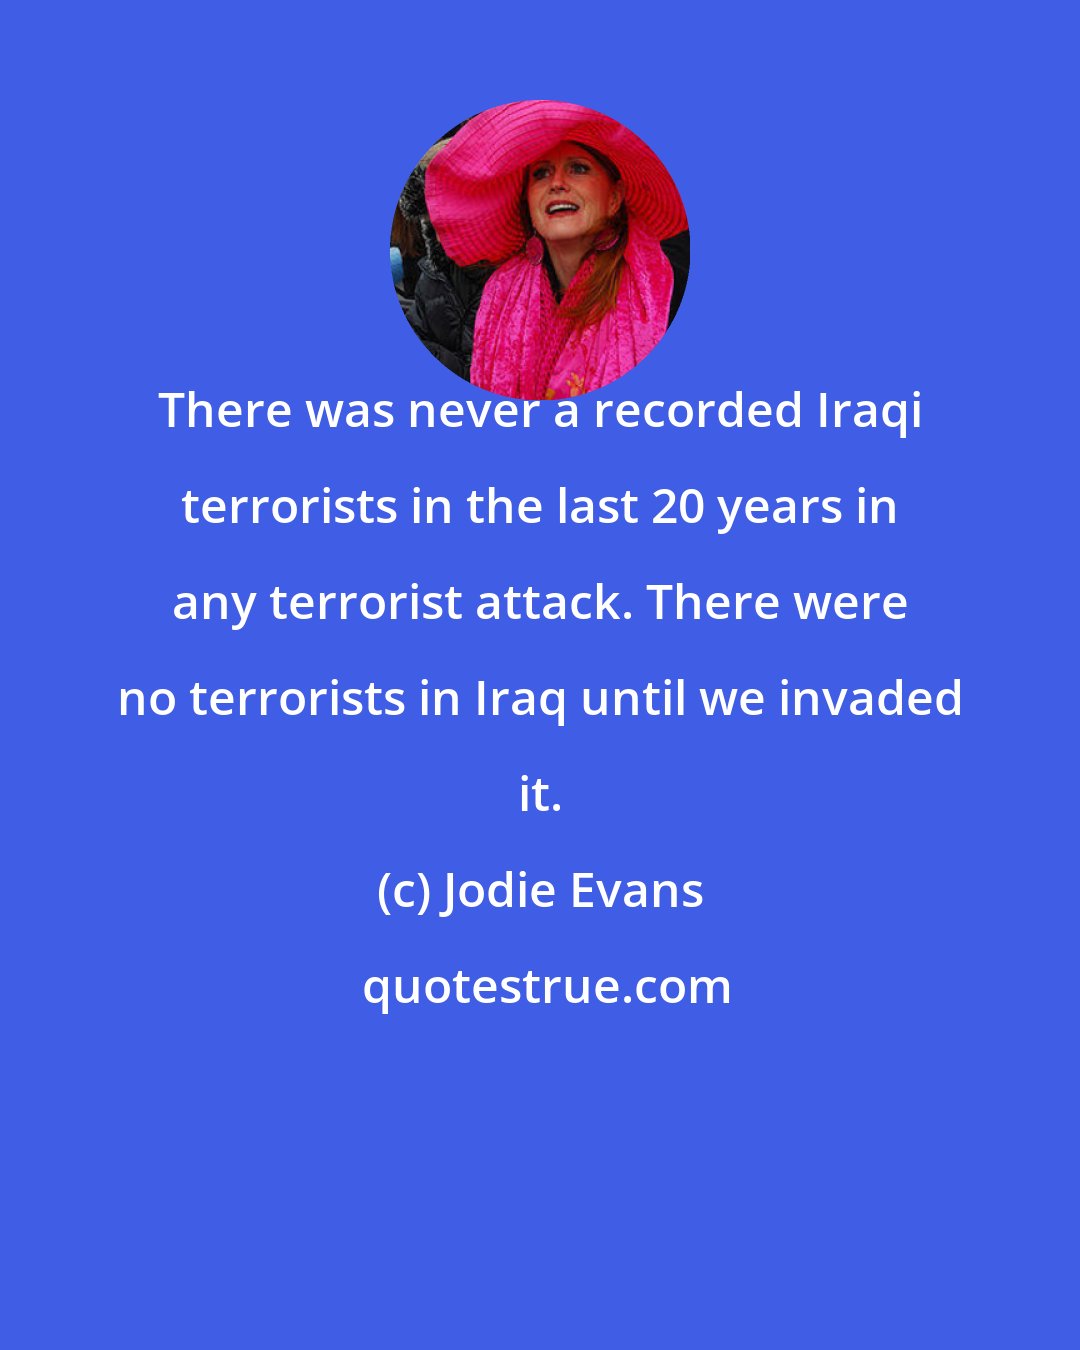 Jodie Evans: There was never a recorded Iraqi terrorists in the last 20 years in any terrorist attack. There were no terrorists in Iraq until we invaded it.